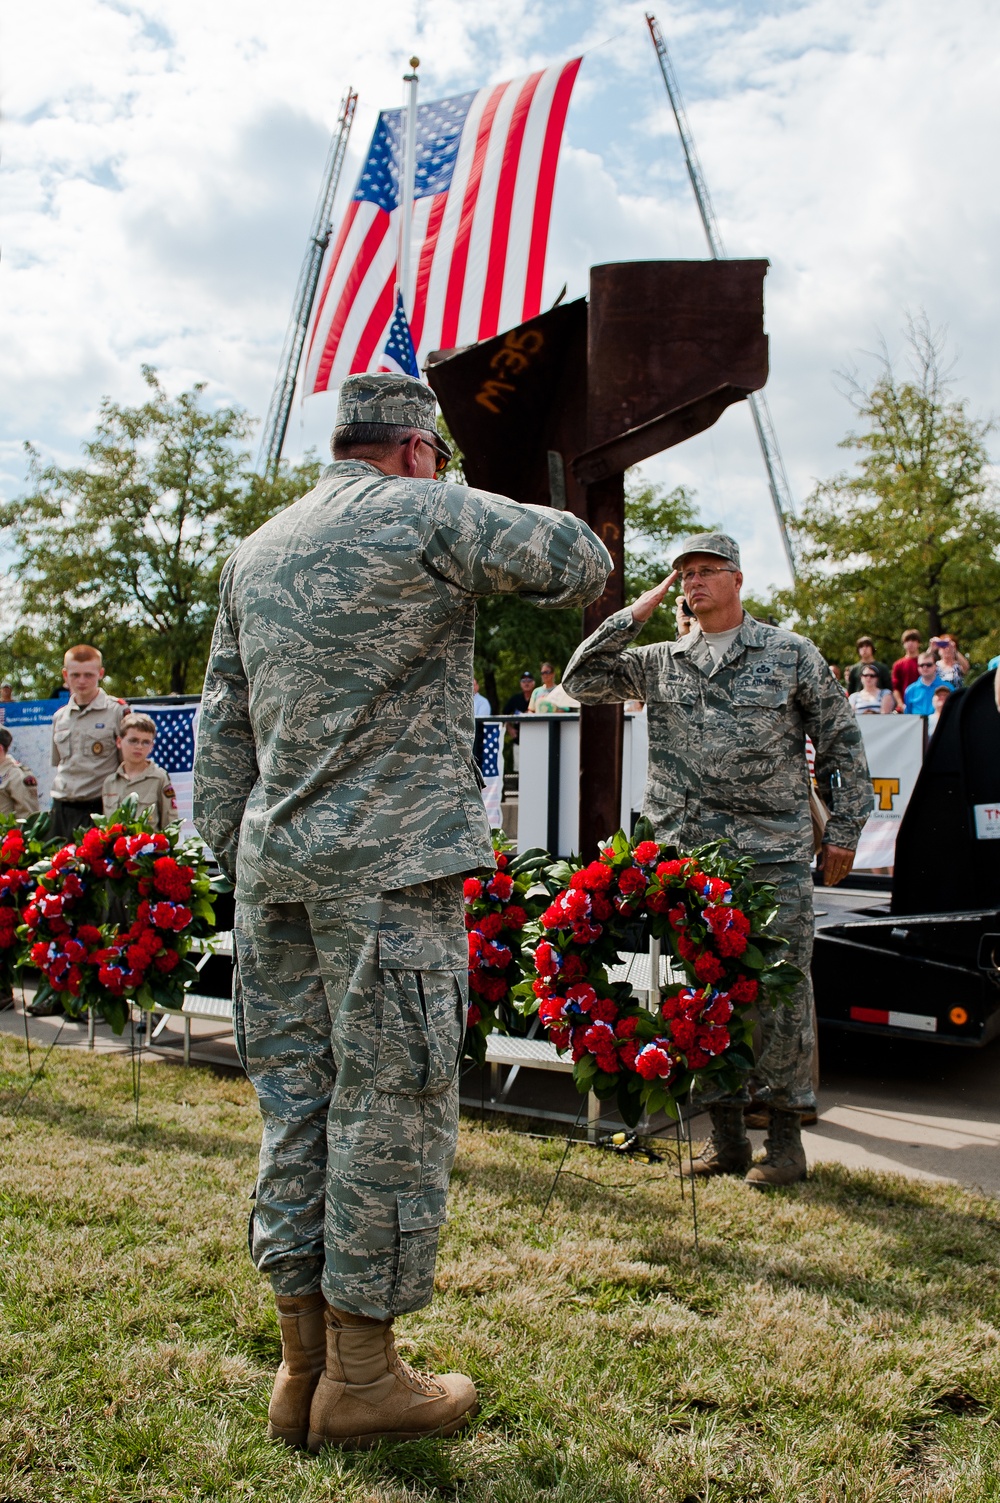 Kentucky Air Guard participates in 10th anniversary observance of 9/11